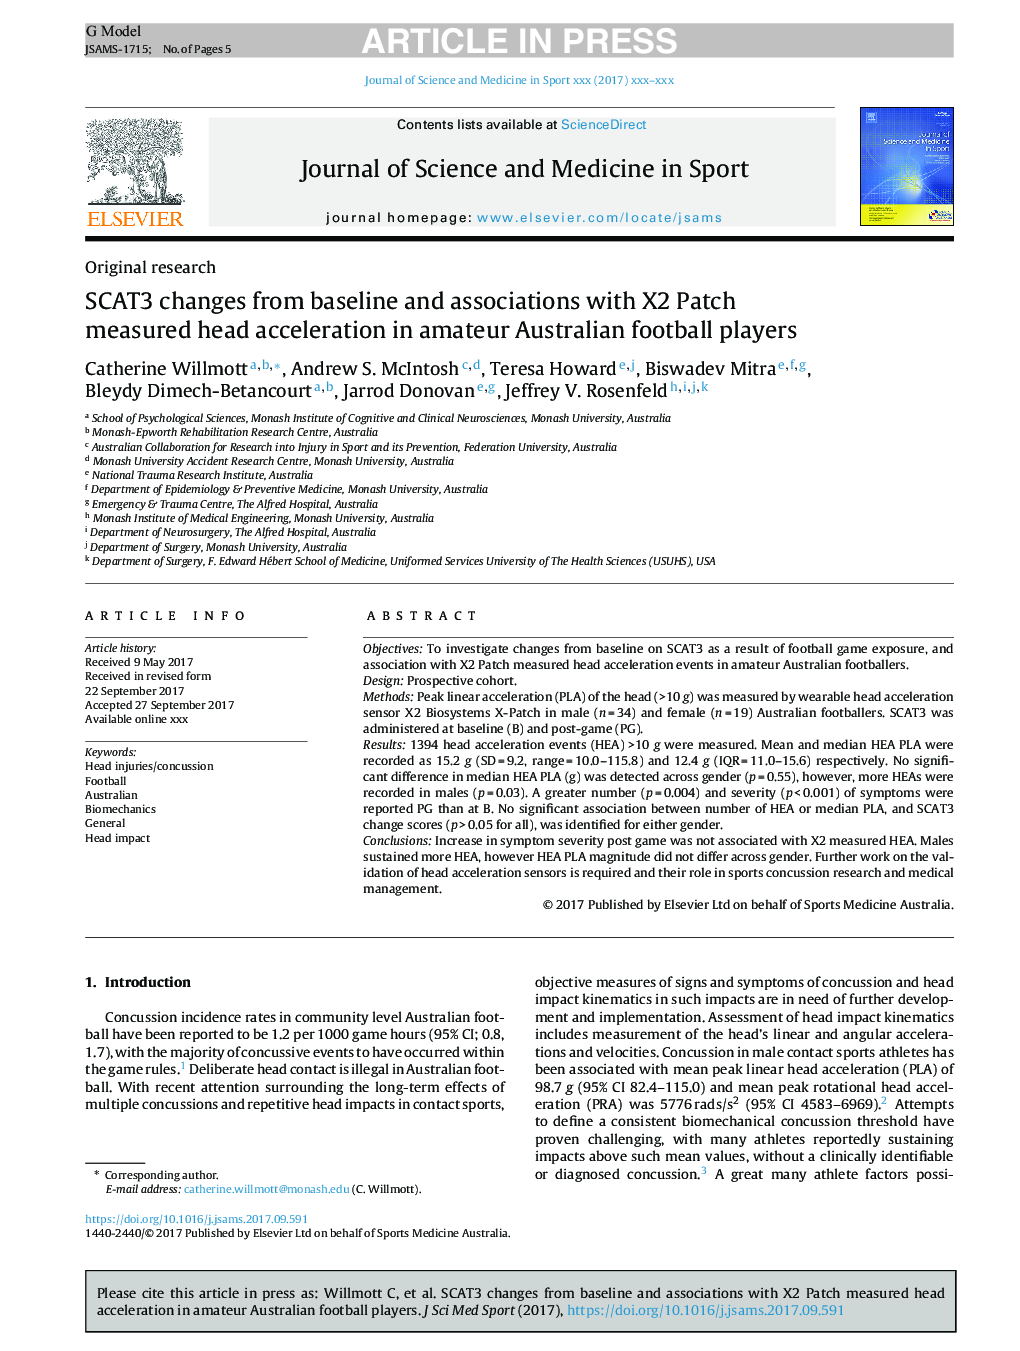 SCAT3 changes from baseline and associations with X2 Patch measured head acceleration in amateur Australian football players